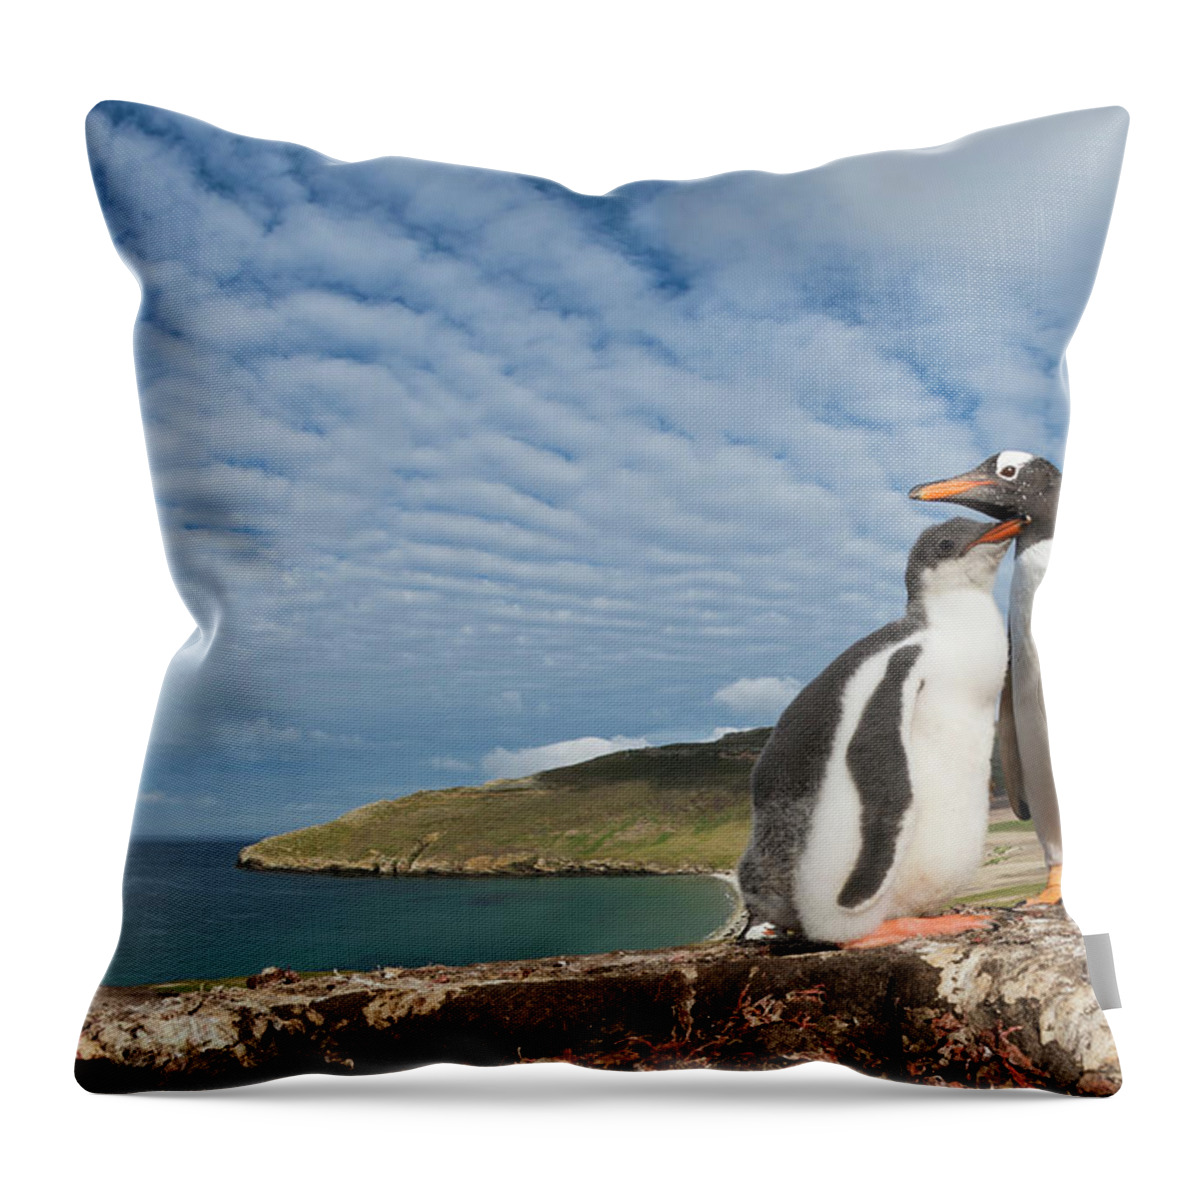 Animal In Habitat Throw Pillow featuring the photograph Gento Penguin And Chick On Coast by Tui De Roy